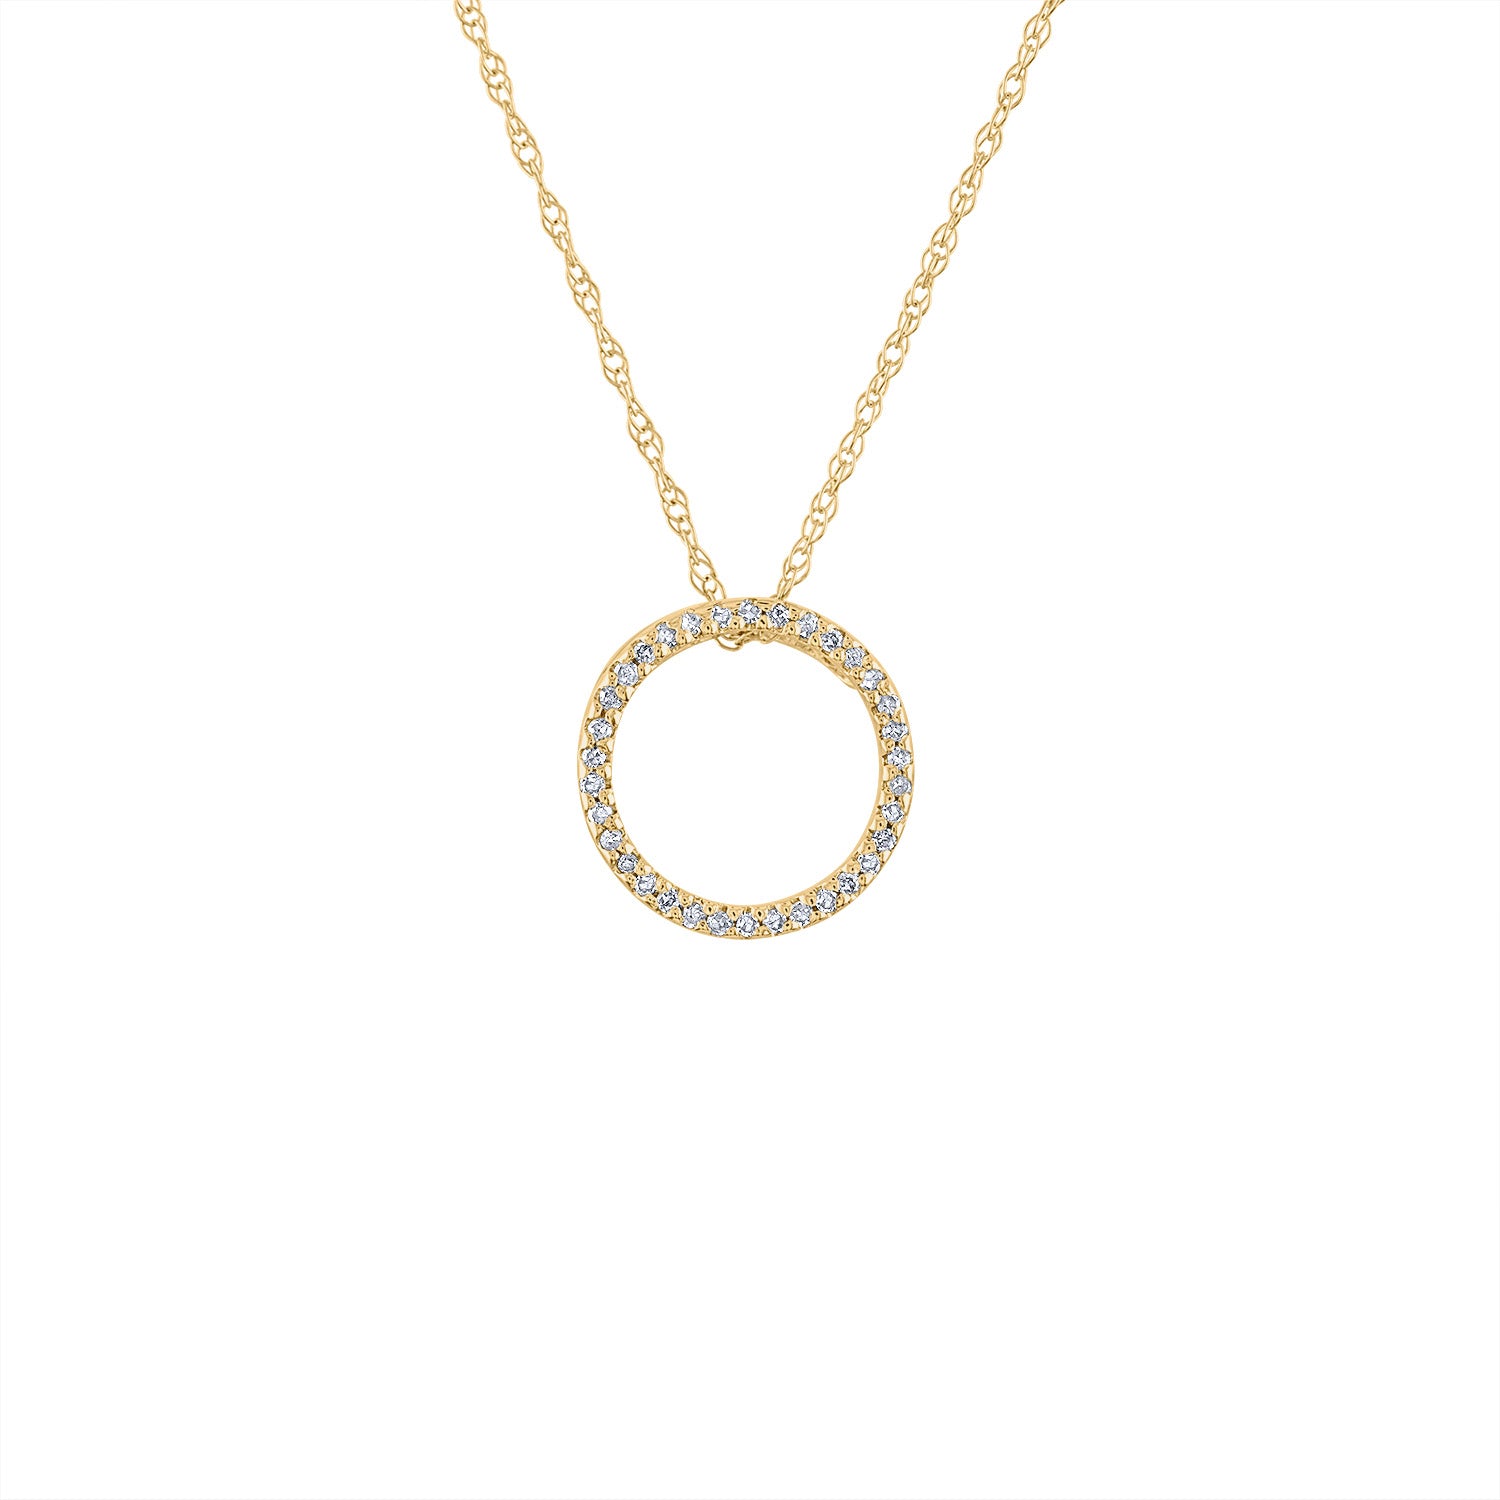 14KT GOLD SMALL DIAMOND OPEN CIRCLE NECKLACE – Jewels by Joanne